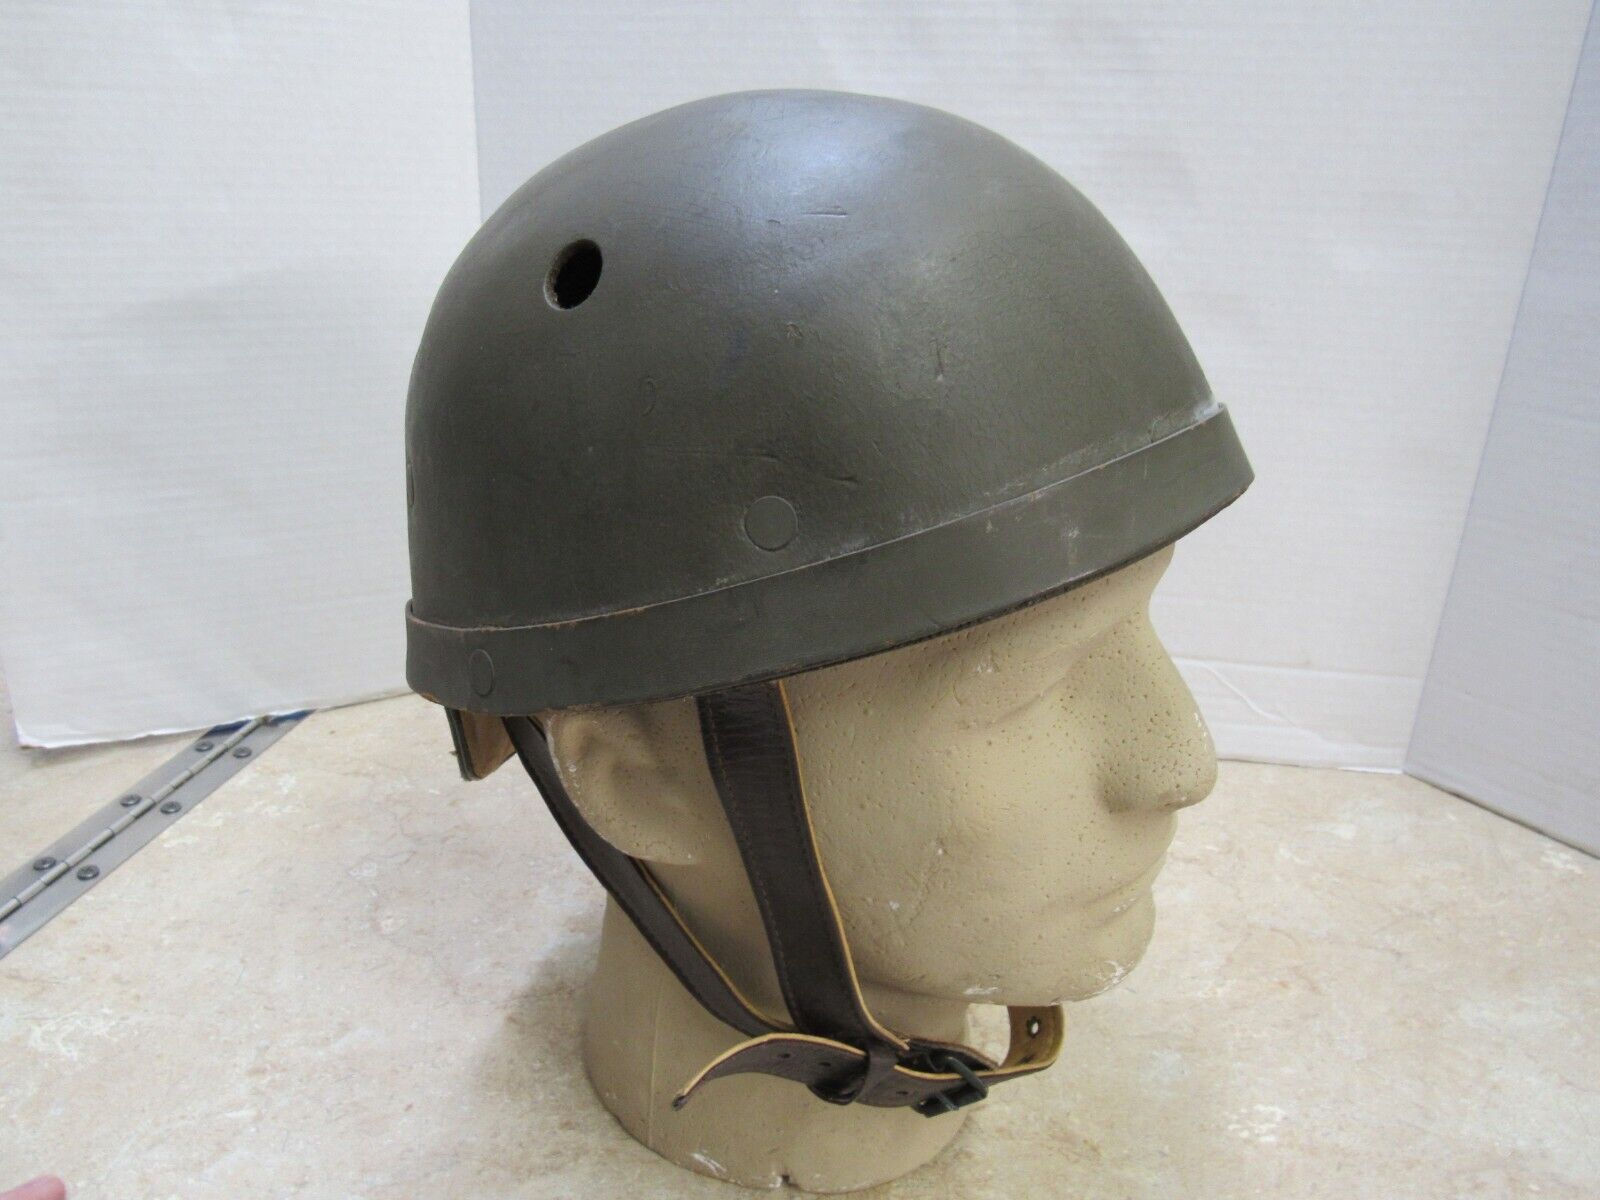 Post WW2 French Tanker Helmet Armored Vehicle M1951 French Indo China Era